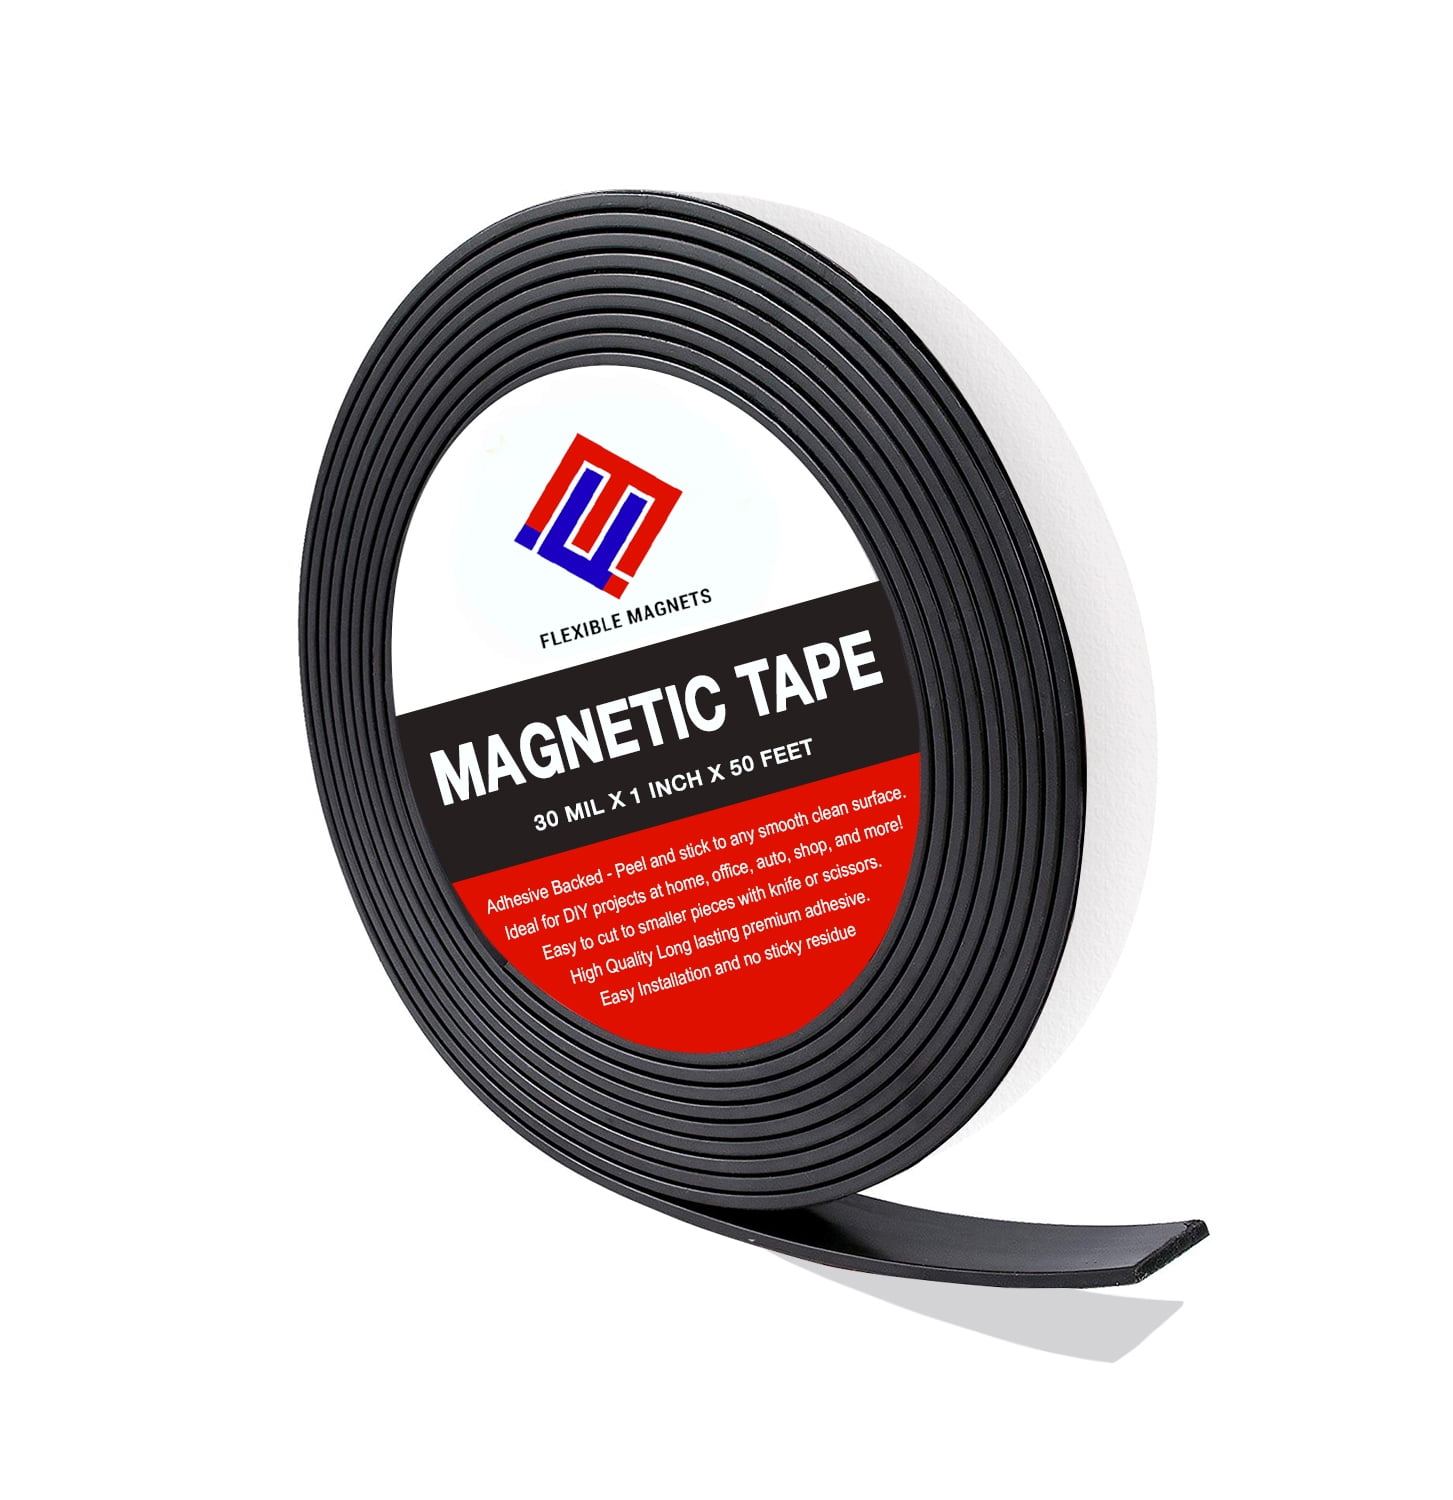 Dry Erase Magnetic Strip Roll Write on/Wipe Off Magnet Without Marker 1 Inch x 50 Feet 